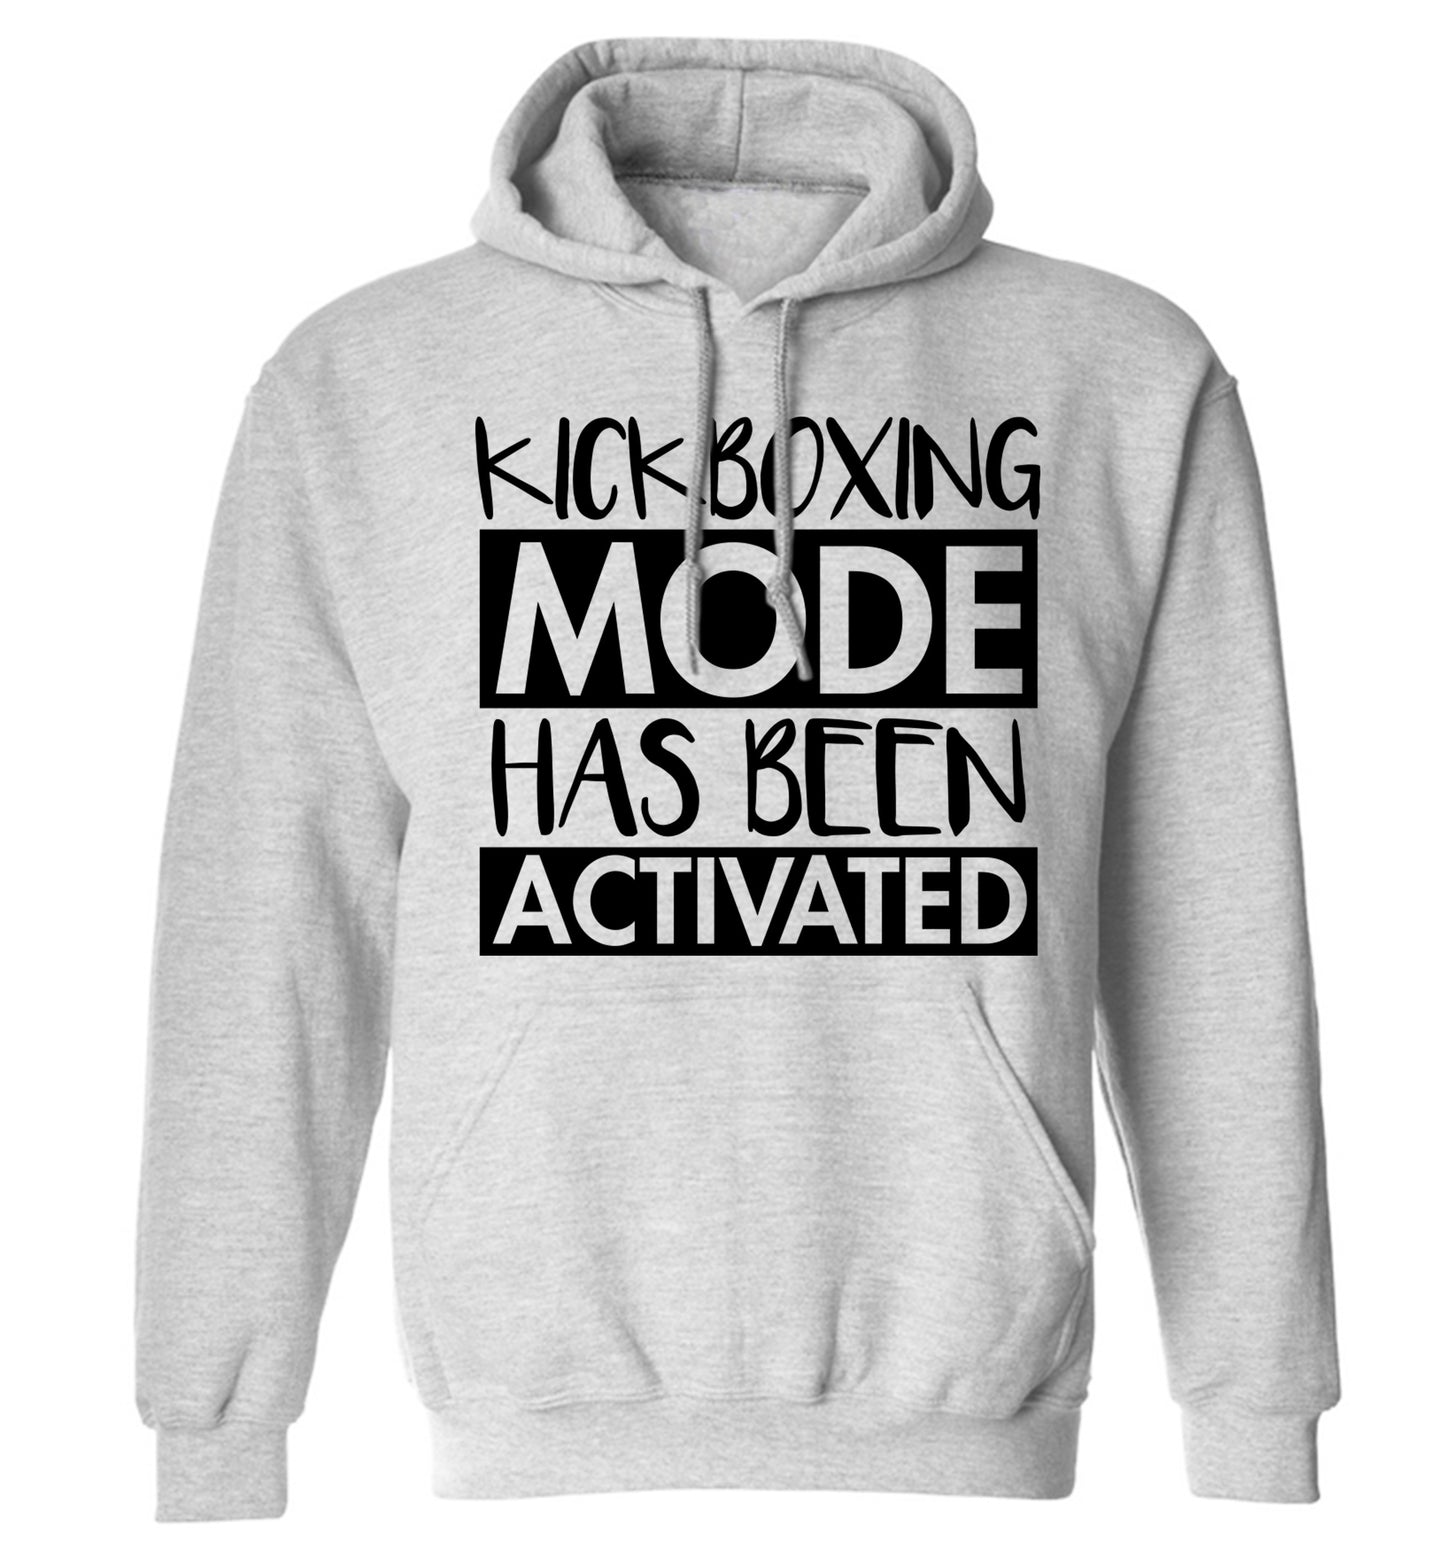 Kickboxing mode activated adults unisex grey hoodie 2XL